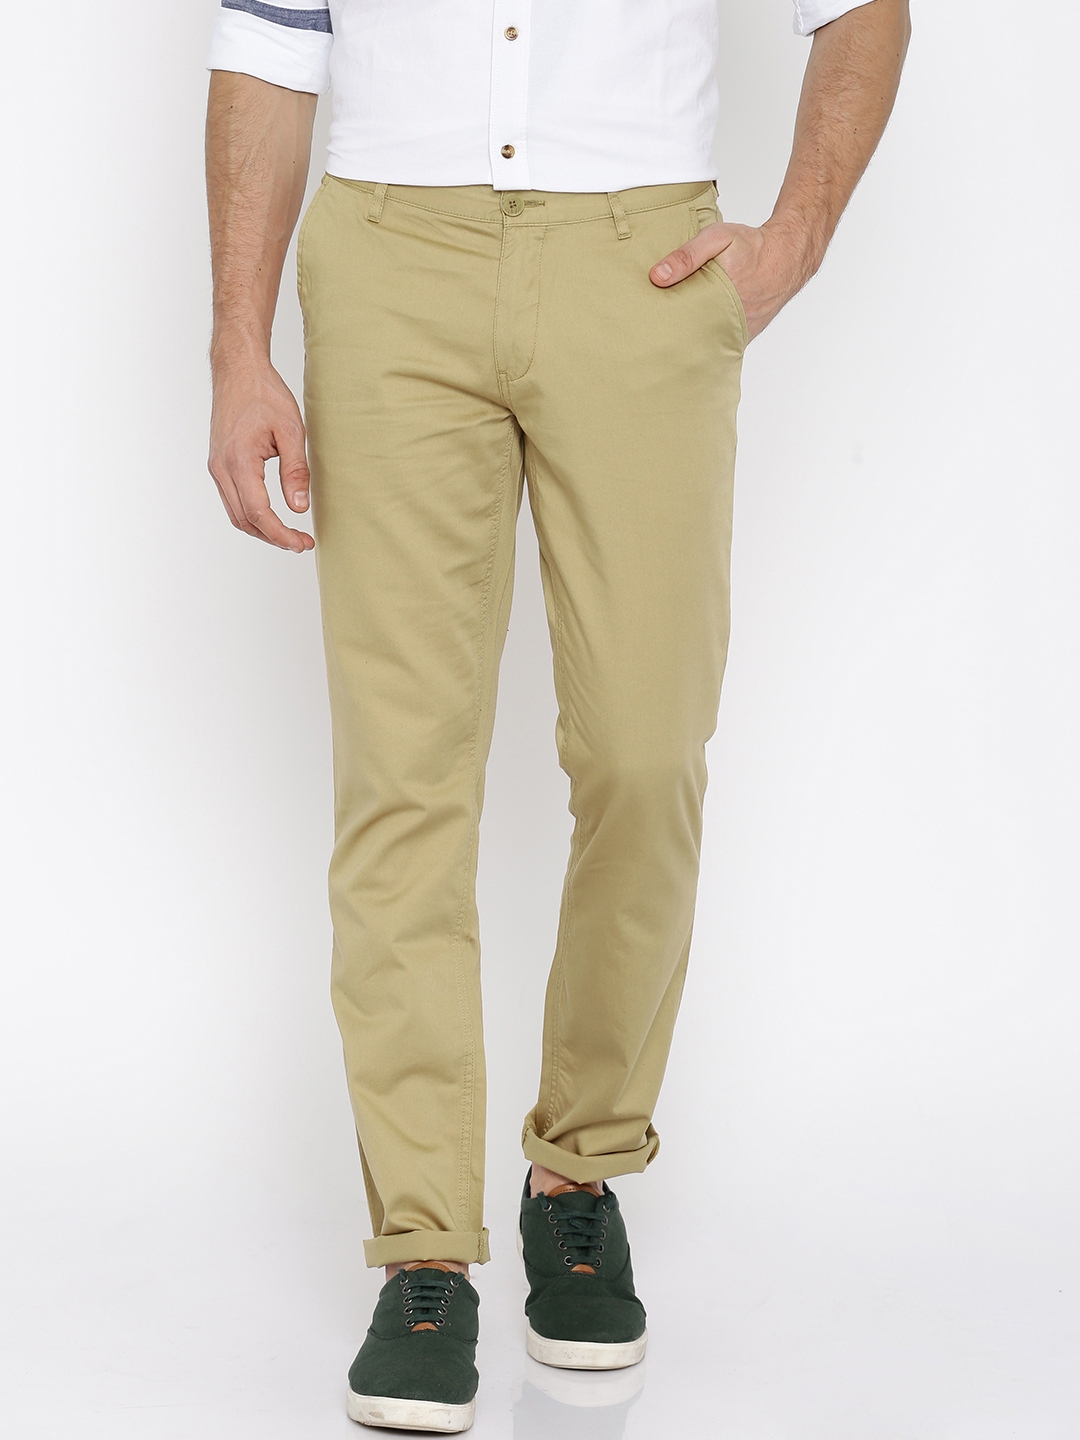 Canvas Maroon Solid Slim Fit Flat Front Trousers For Men With 32 To 36  Waist Size at Best Price in Delhi  DD Enterprises